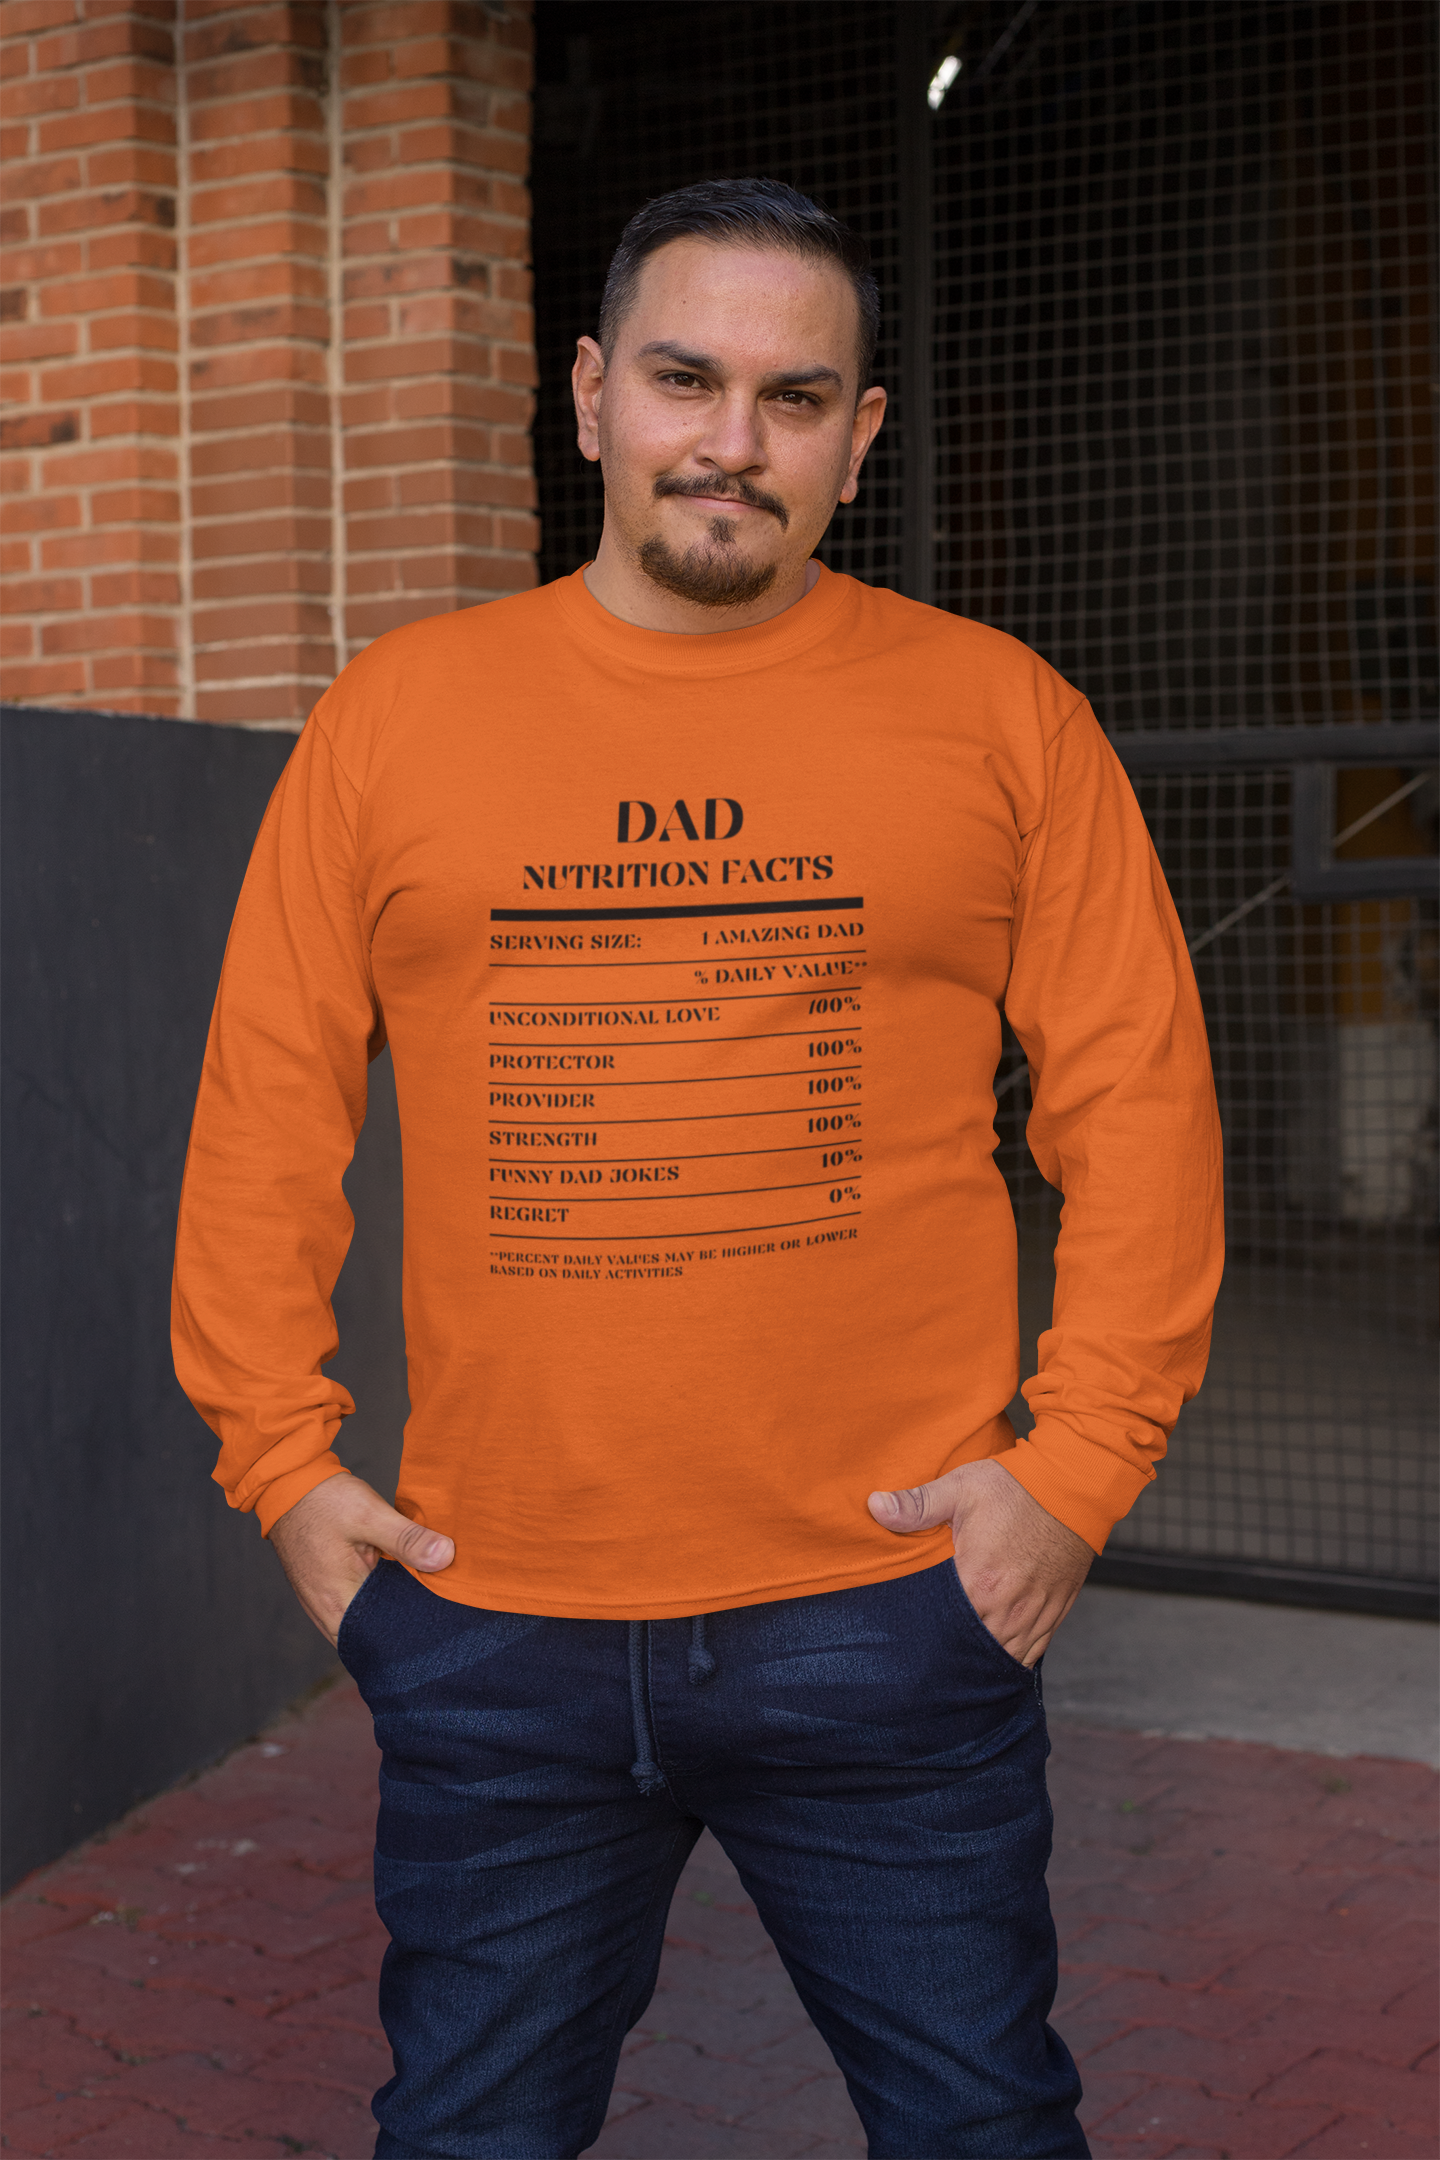 Nutrition Facts T-Shirt LS - Dad - Black